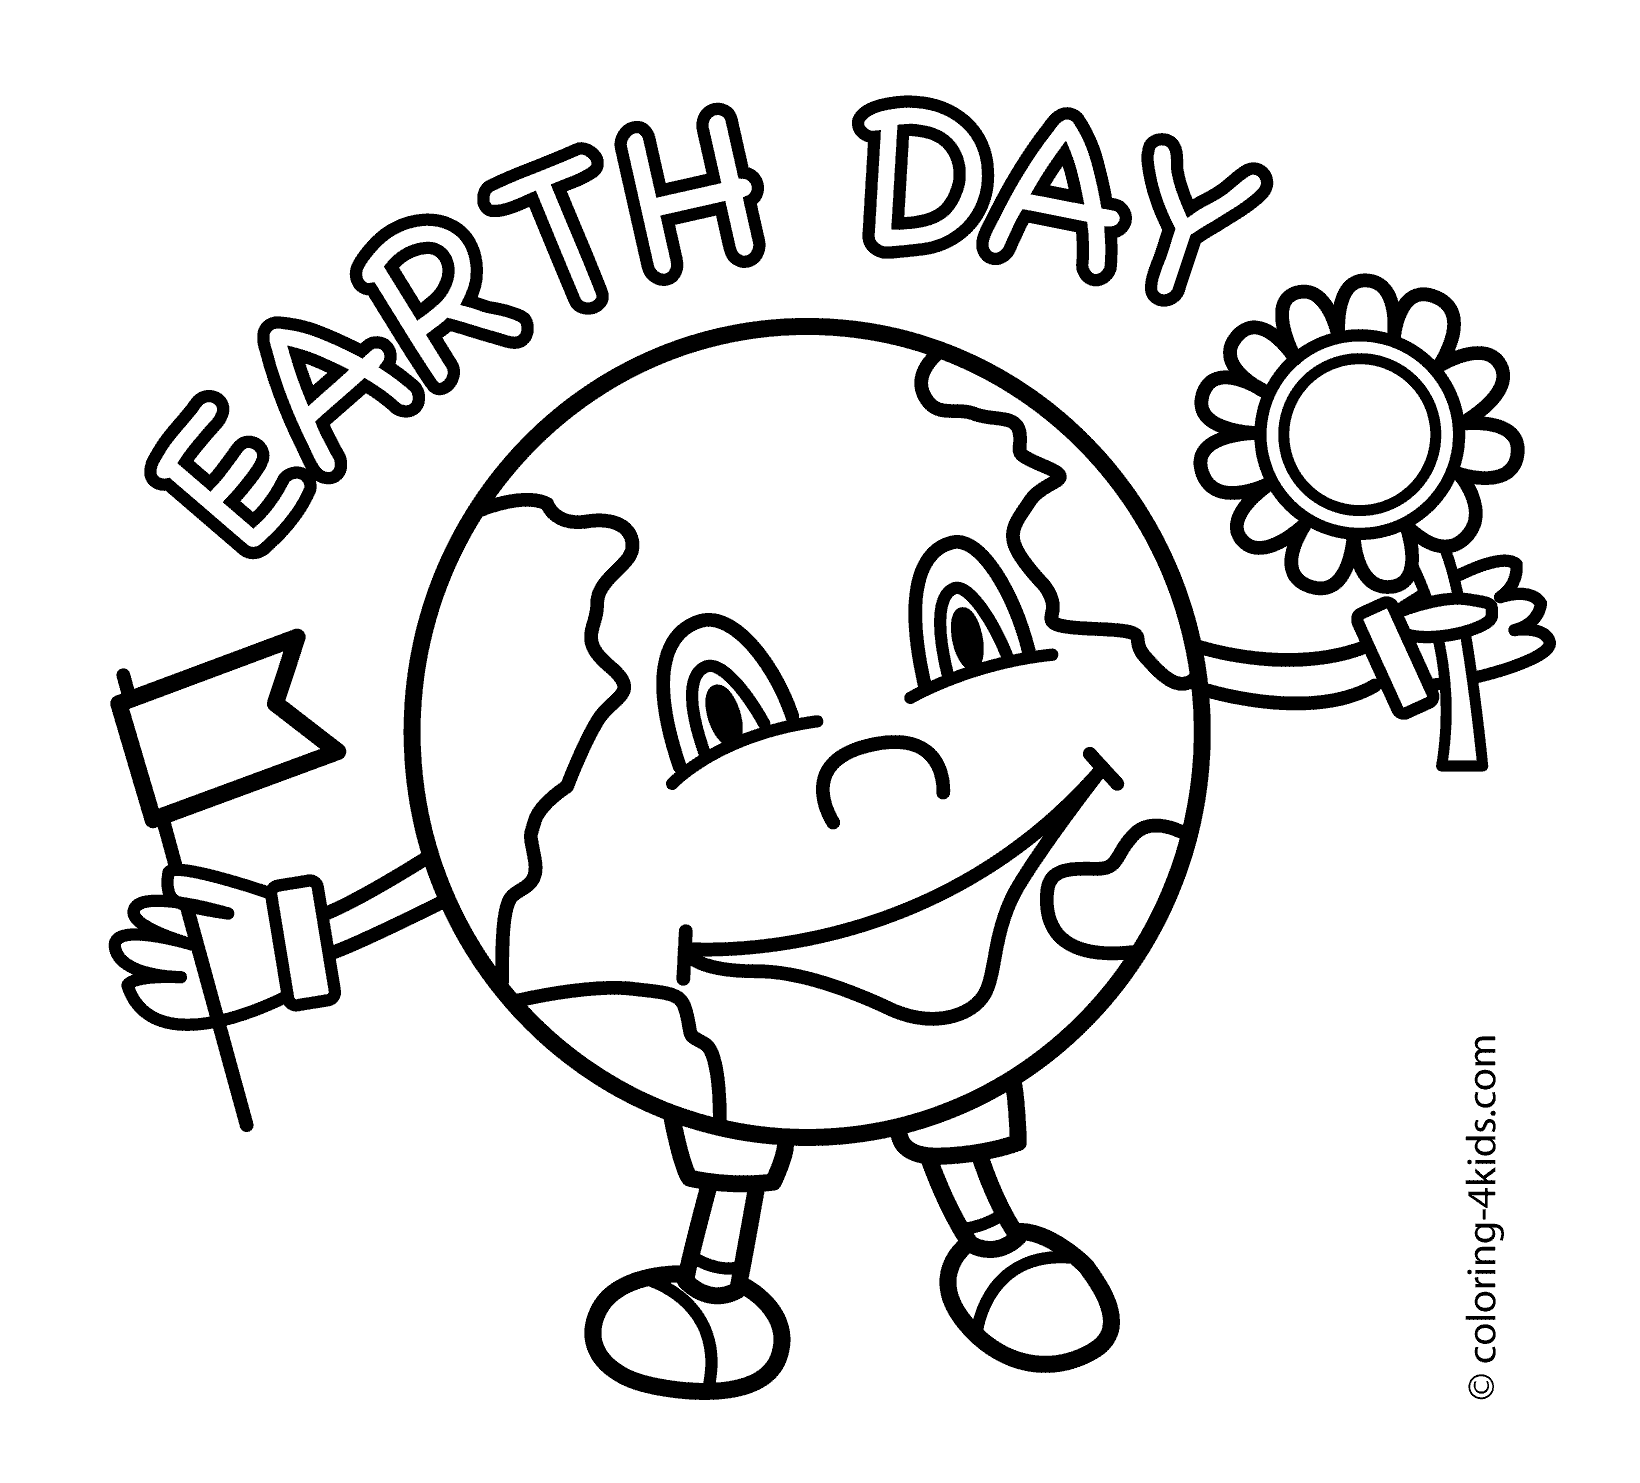 earth day coloring book pages - photo #50